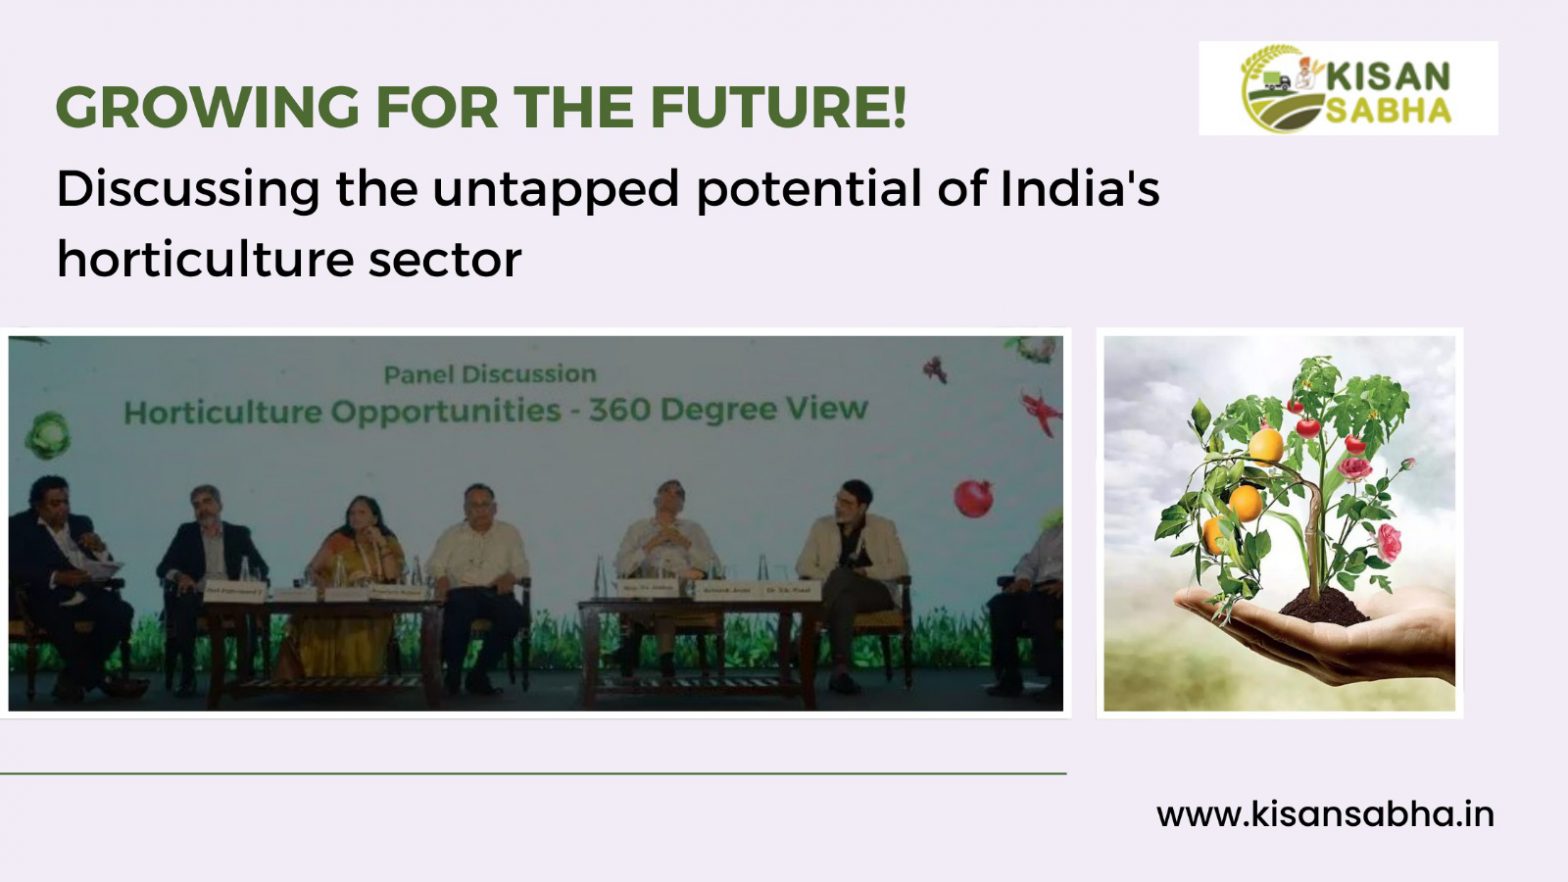 Growing for the future! Discussing the untapped potential of India's horticulture sector